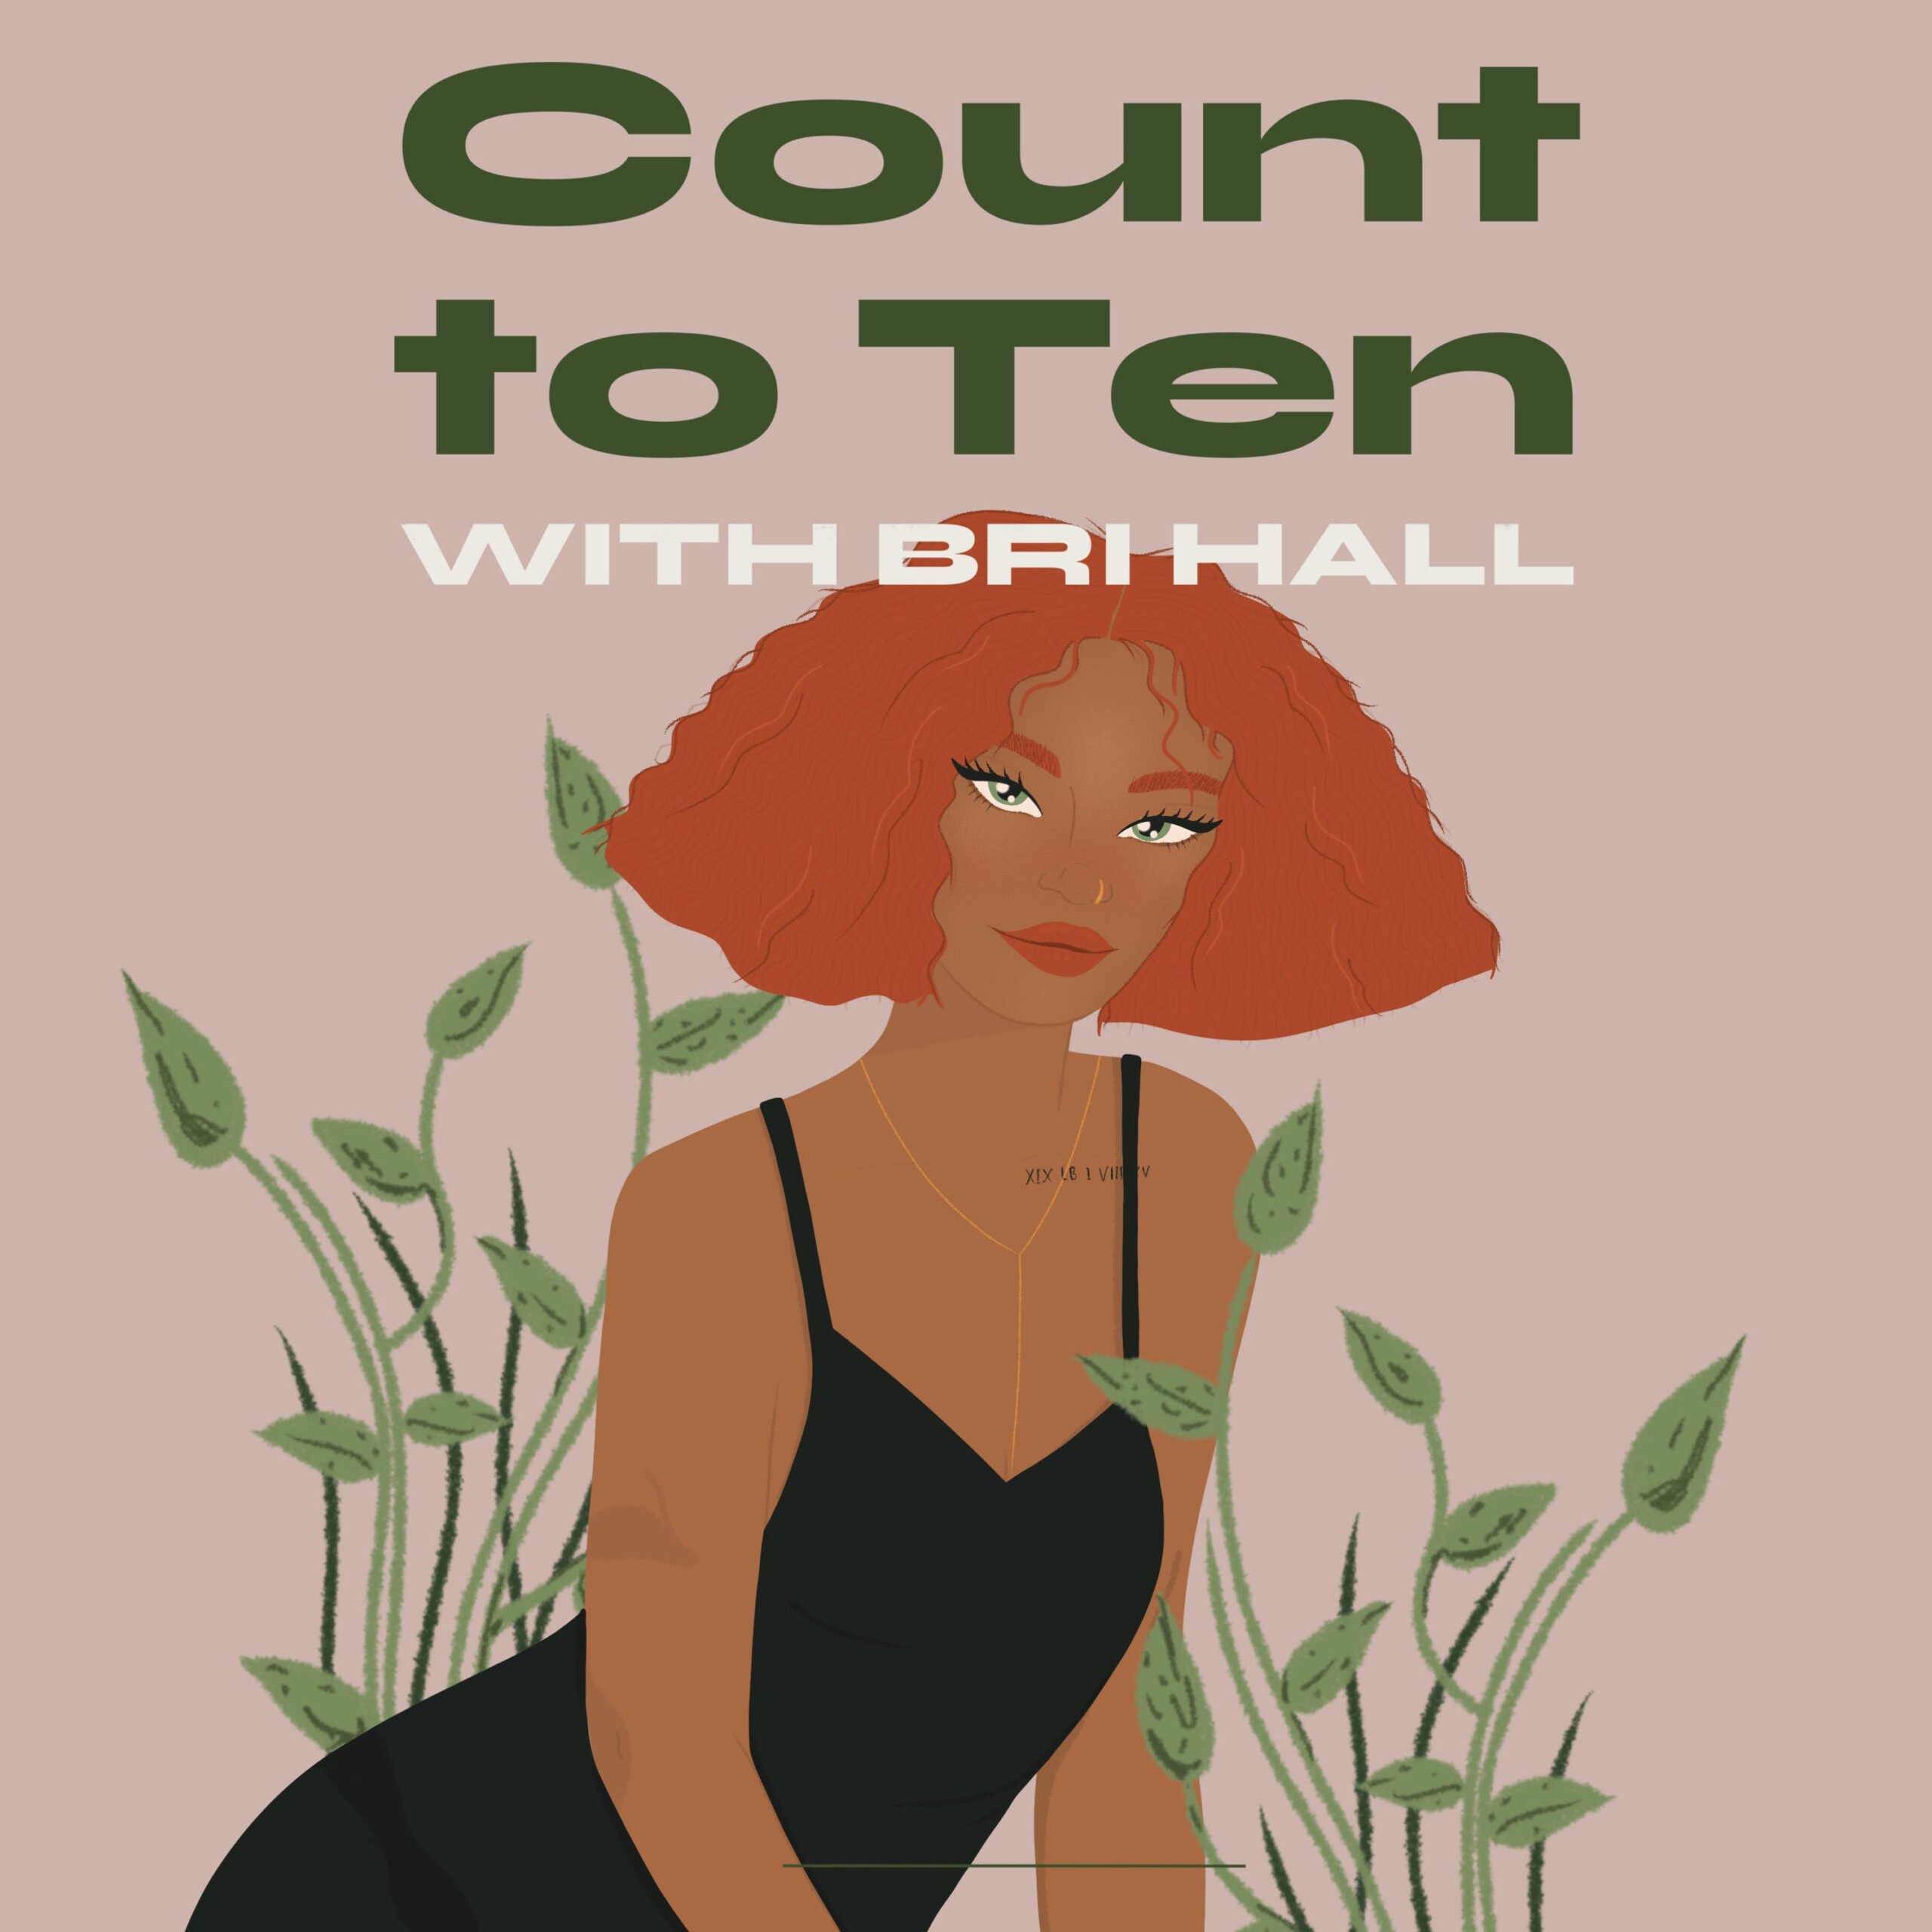 count to ten cover art by Bri Hall for use by 360 Magazine